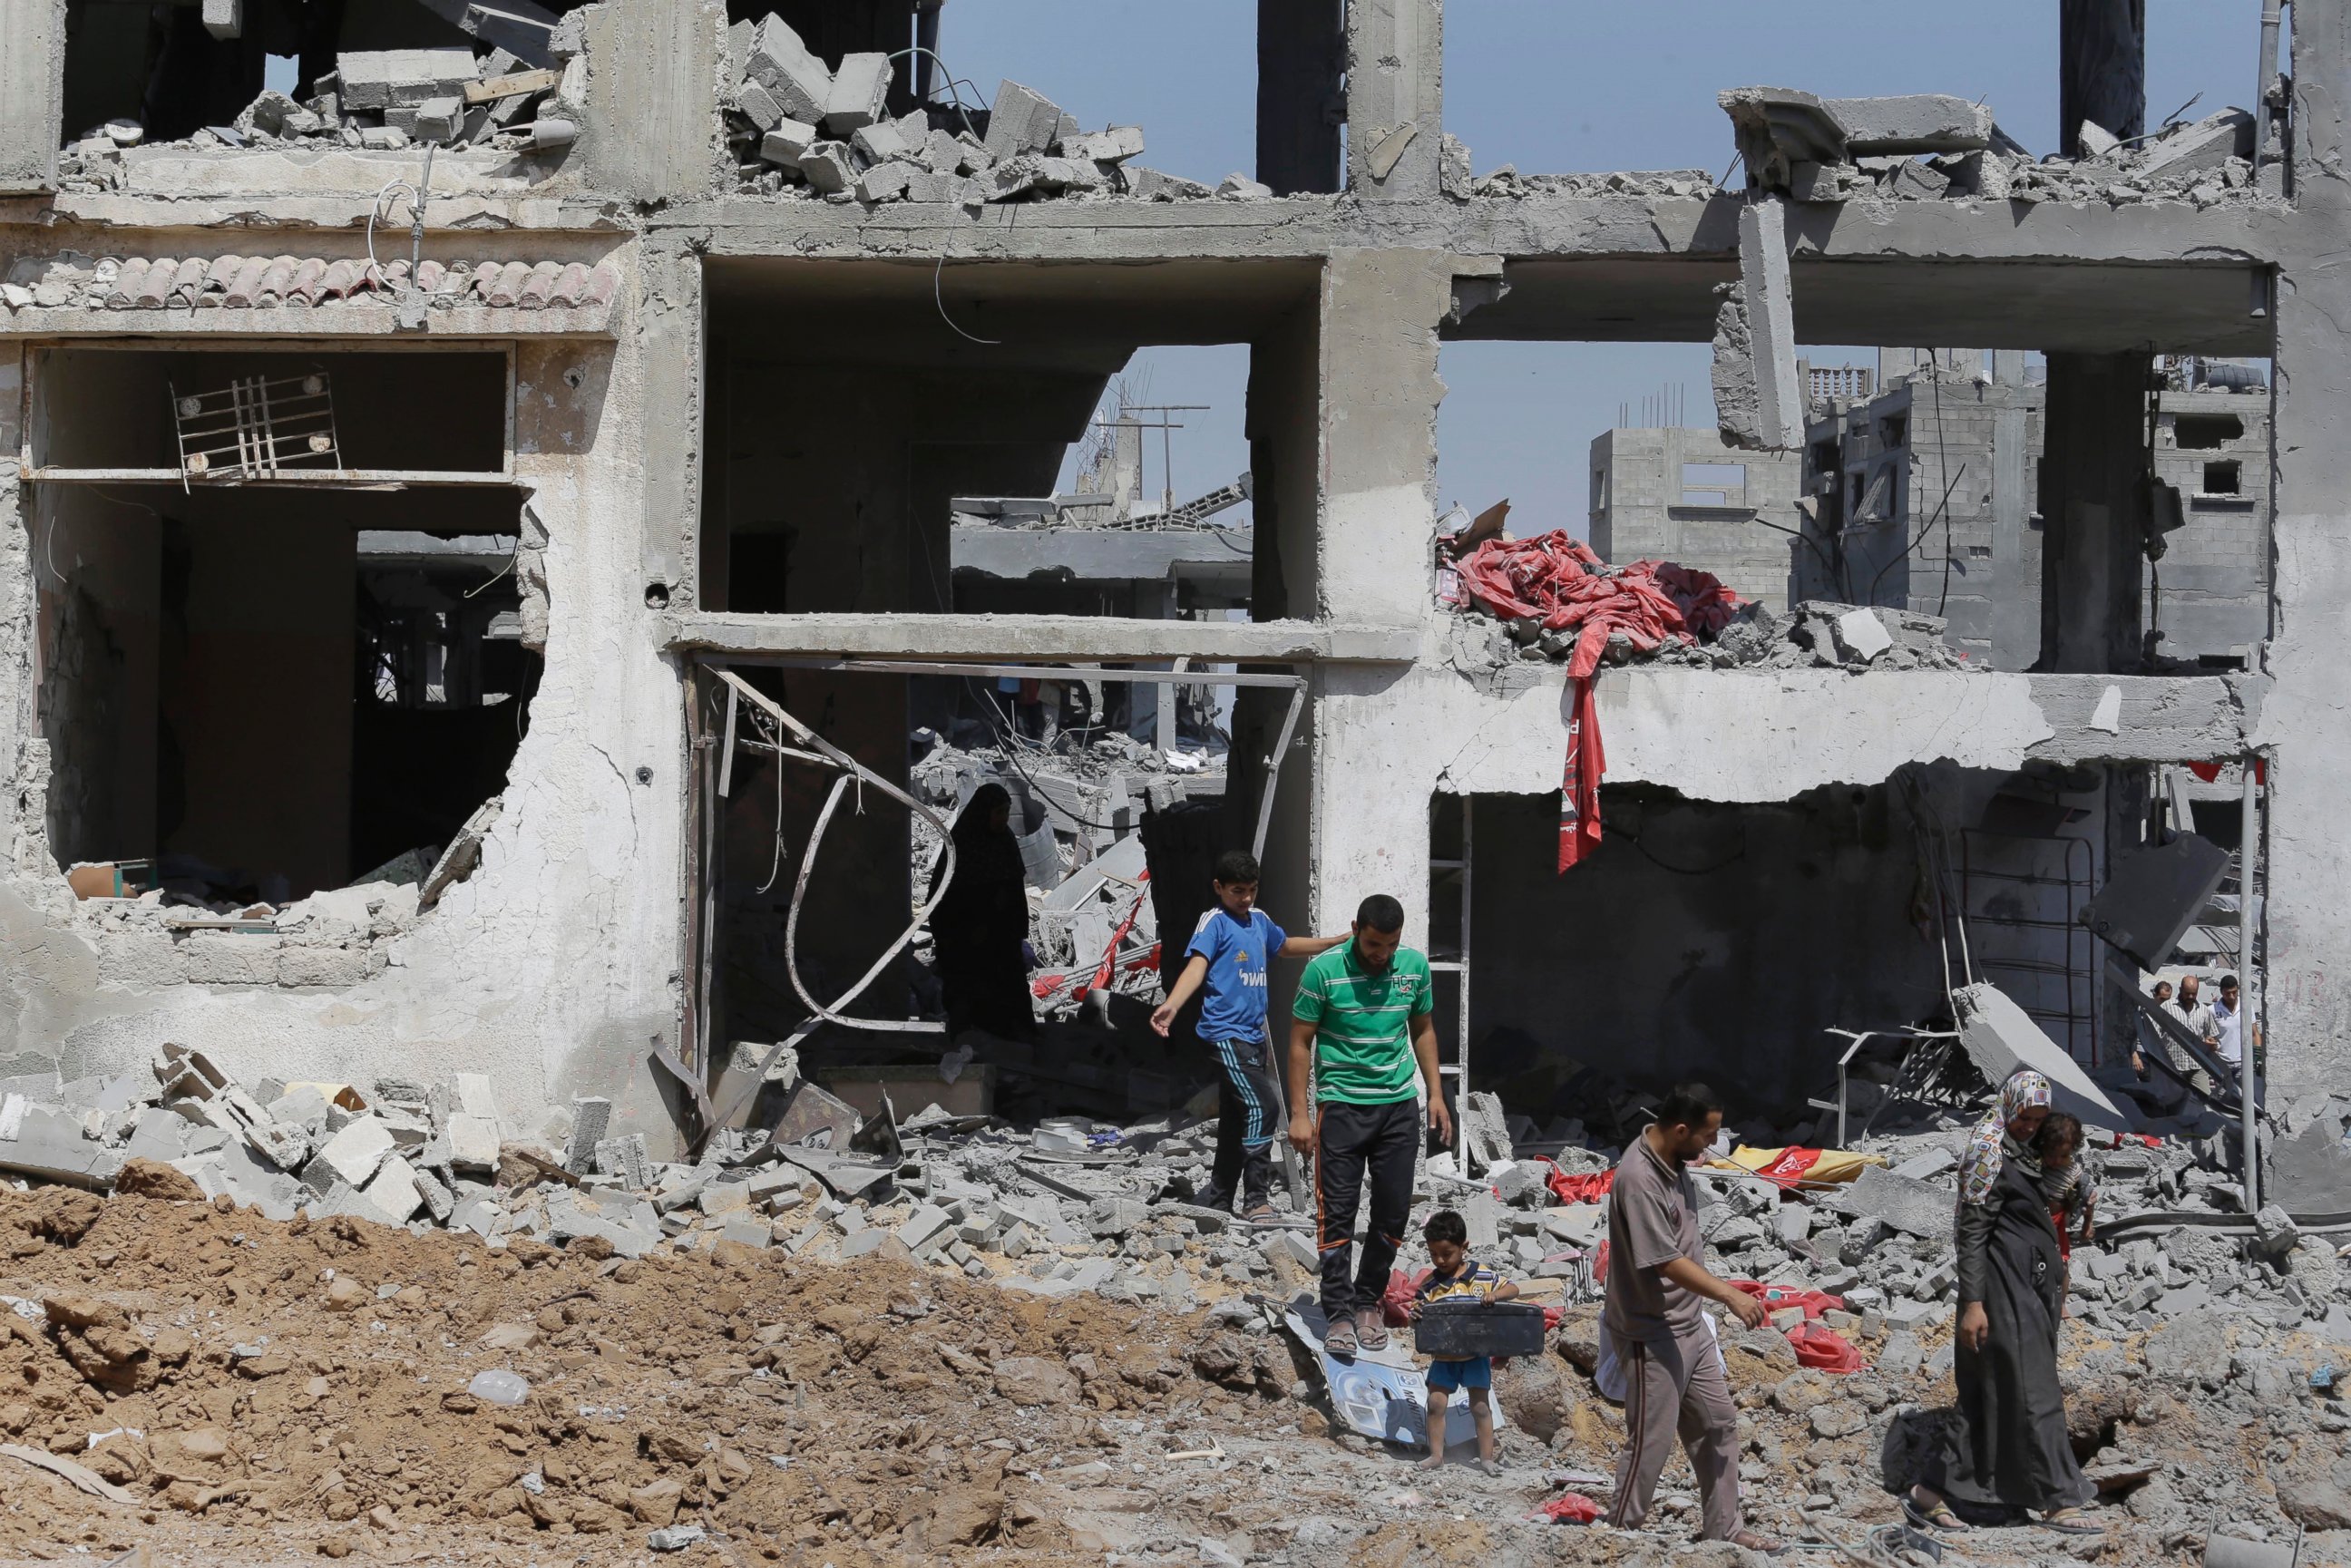 PHOTO: Palestinians carry their belongings after salvaging them from their destroyed house in the heavily bombed town of Beit Hanoun, Gaza Strip, Aug. 1, 2014.